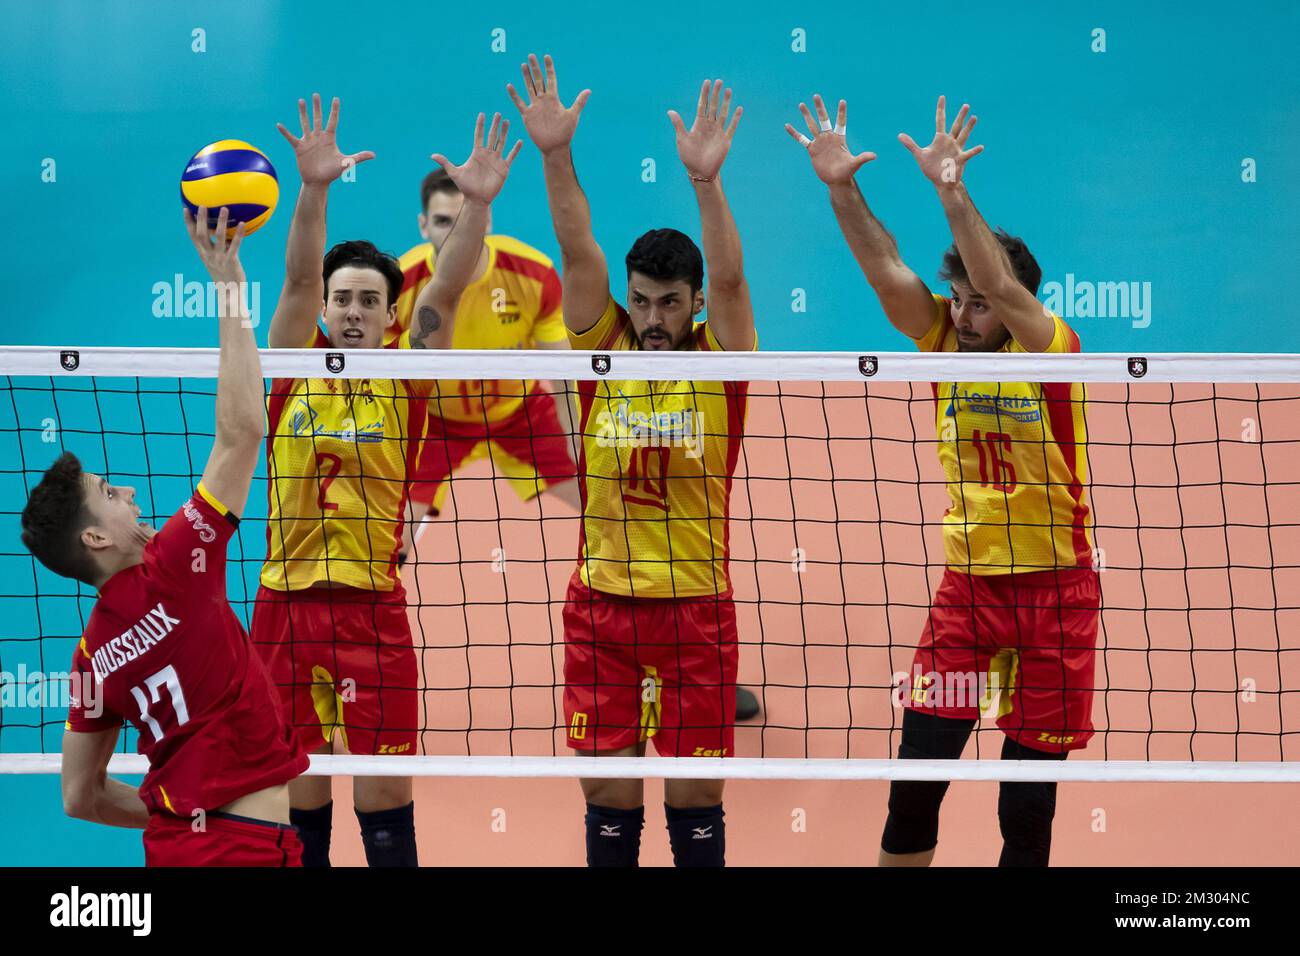 Belgium's Tomas Rousseaux, Spain's Angel Trinidad de Haro, Spain's Jorge Fernandez Valcarel and Spain's Juan Manuel Gonzalez pictured in action during a group B game between Spain and the Red Dragons, Belgian national volleyball team, at the European volleyball championships, Sunday 15 September 2019, in Antwerp. BELGA PHOTO KRISTOF VAN ACCOM Stock Photo